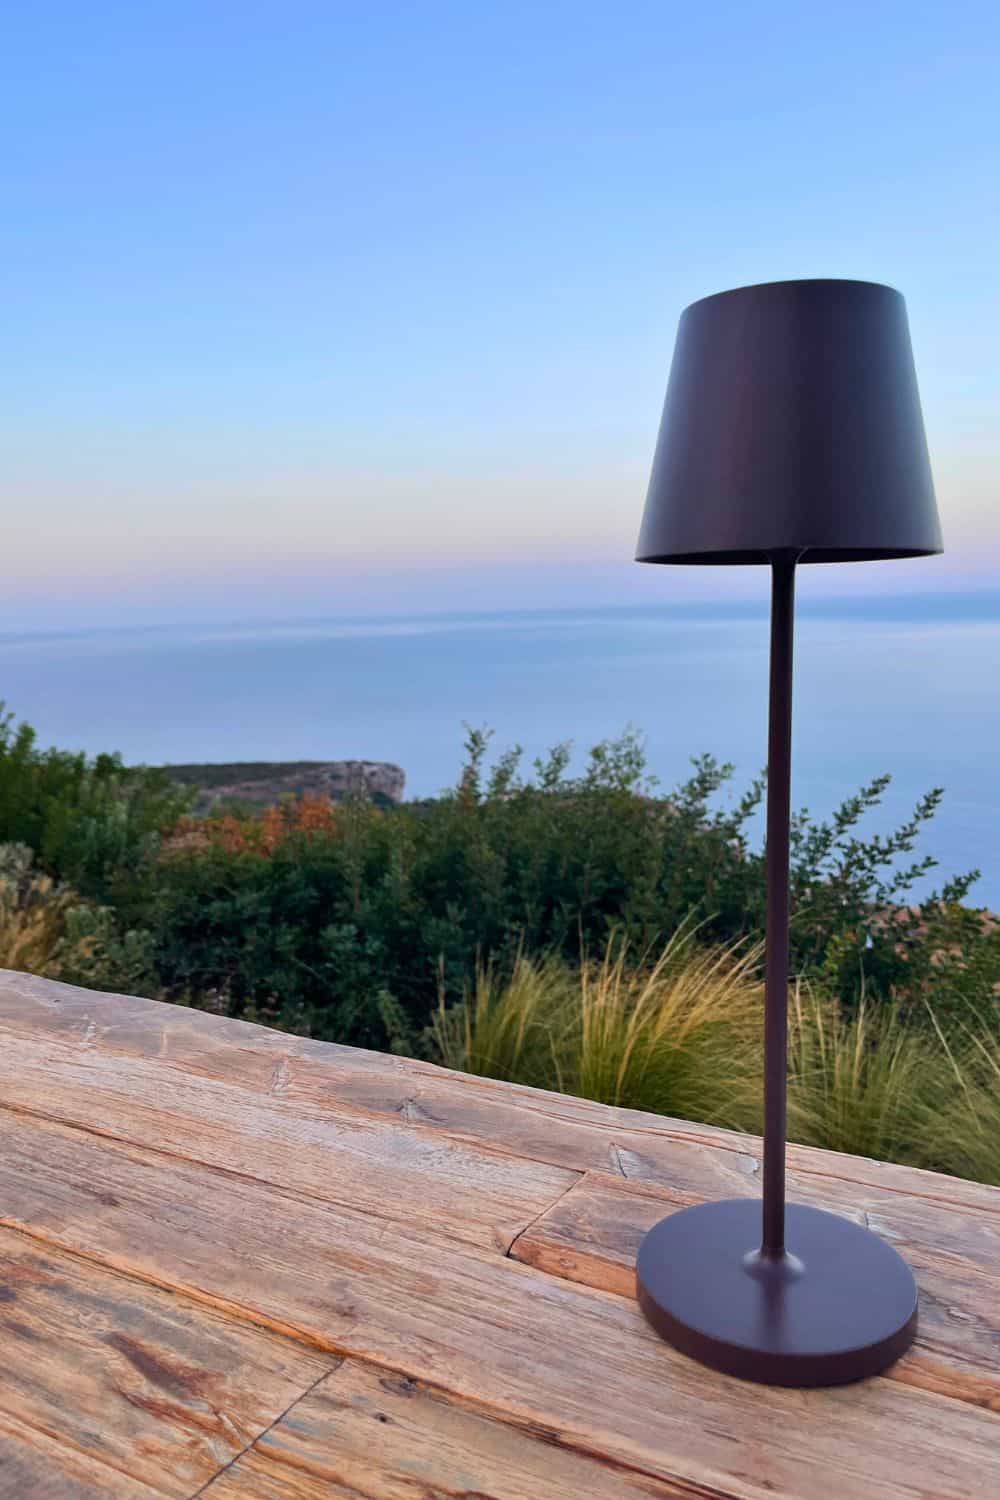 A modern lamp stands on a wooden table, with a panoramic view of the twilight sky meeting the calm sea, conveying a peaceful dining experience on a hillside.